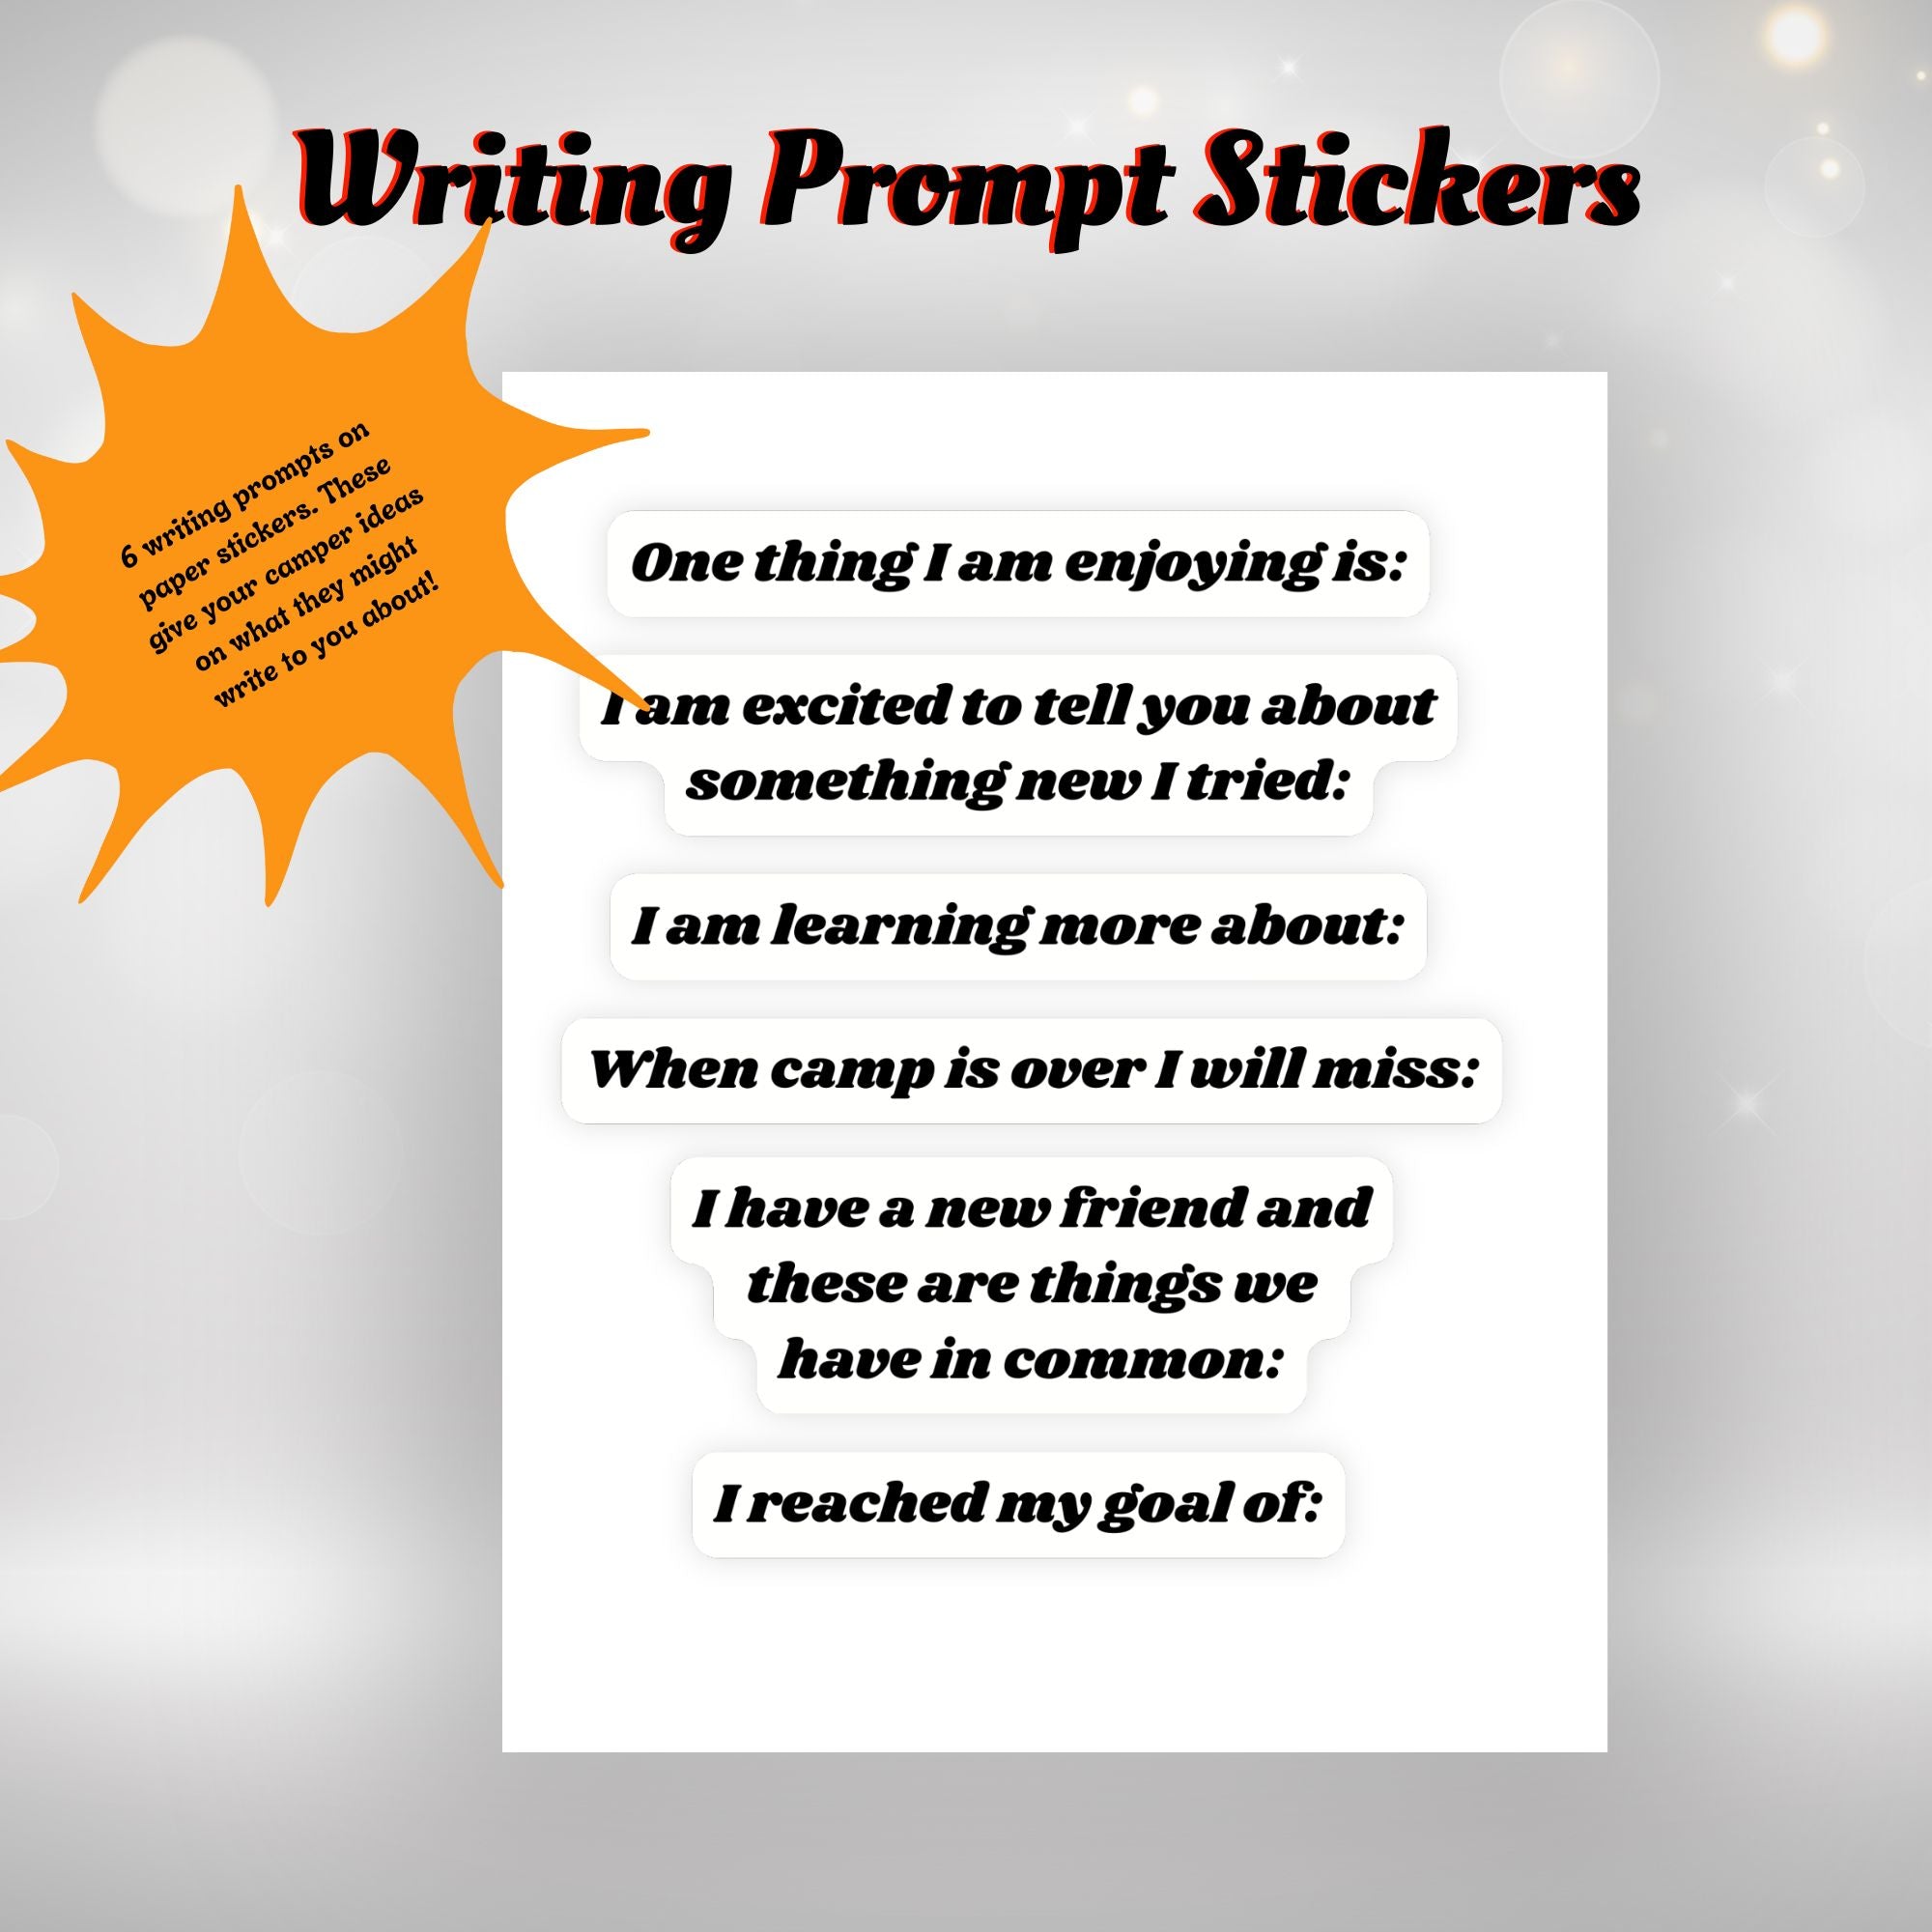 This image shows the writing prompt stickers with six different topics.